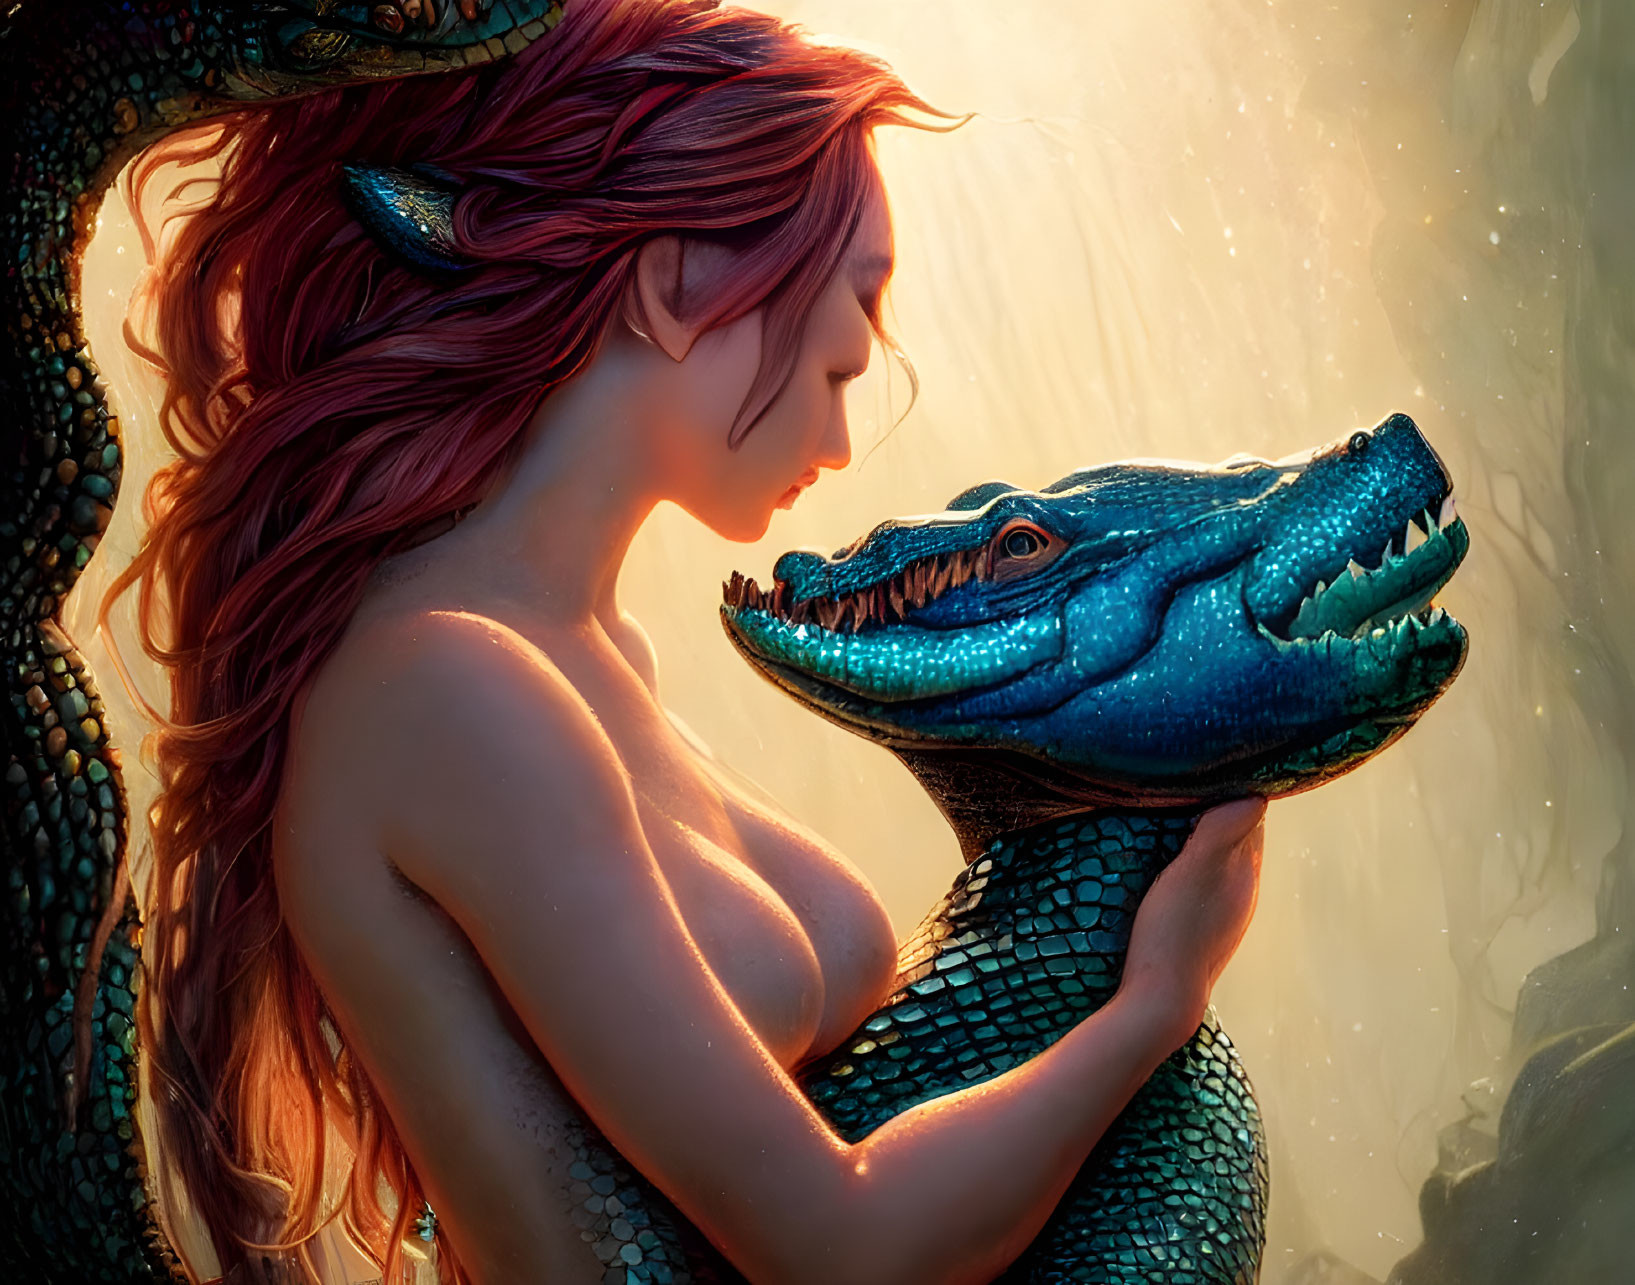 Woman with elfin features embraces blue reptilian creature in warm, glowing backdrop